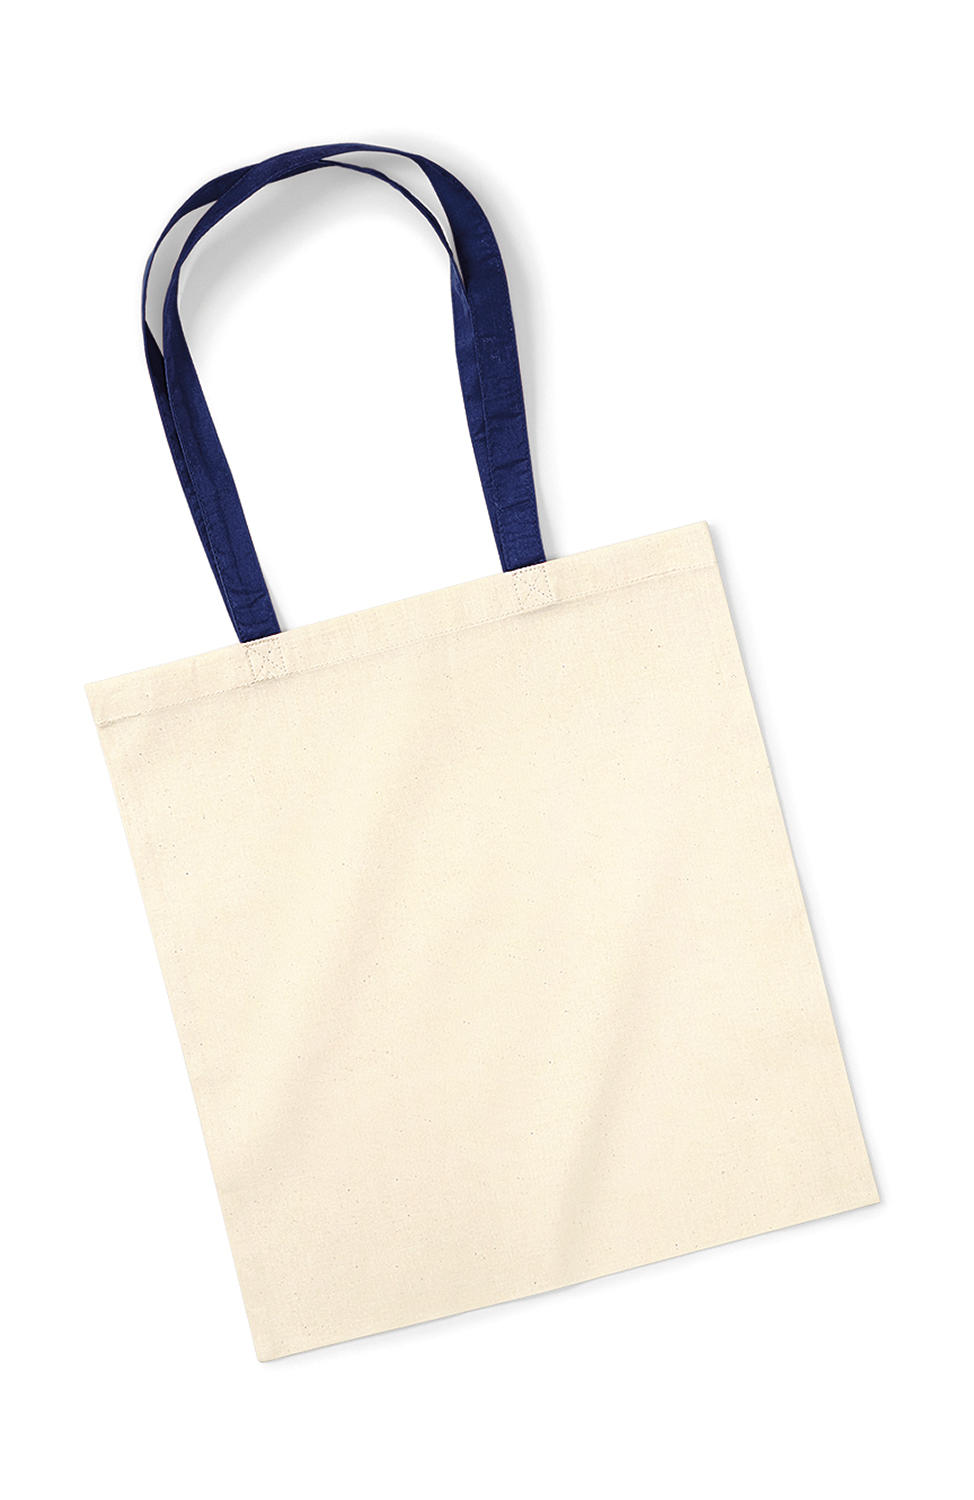  Bag for Life - Contrast Handles in Farbe Natural/French Navy